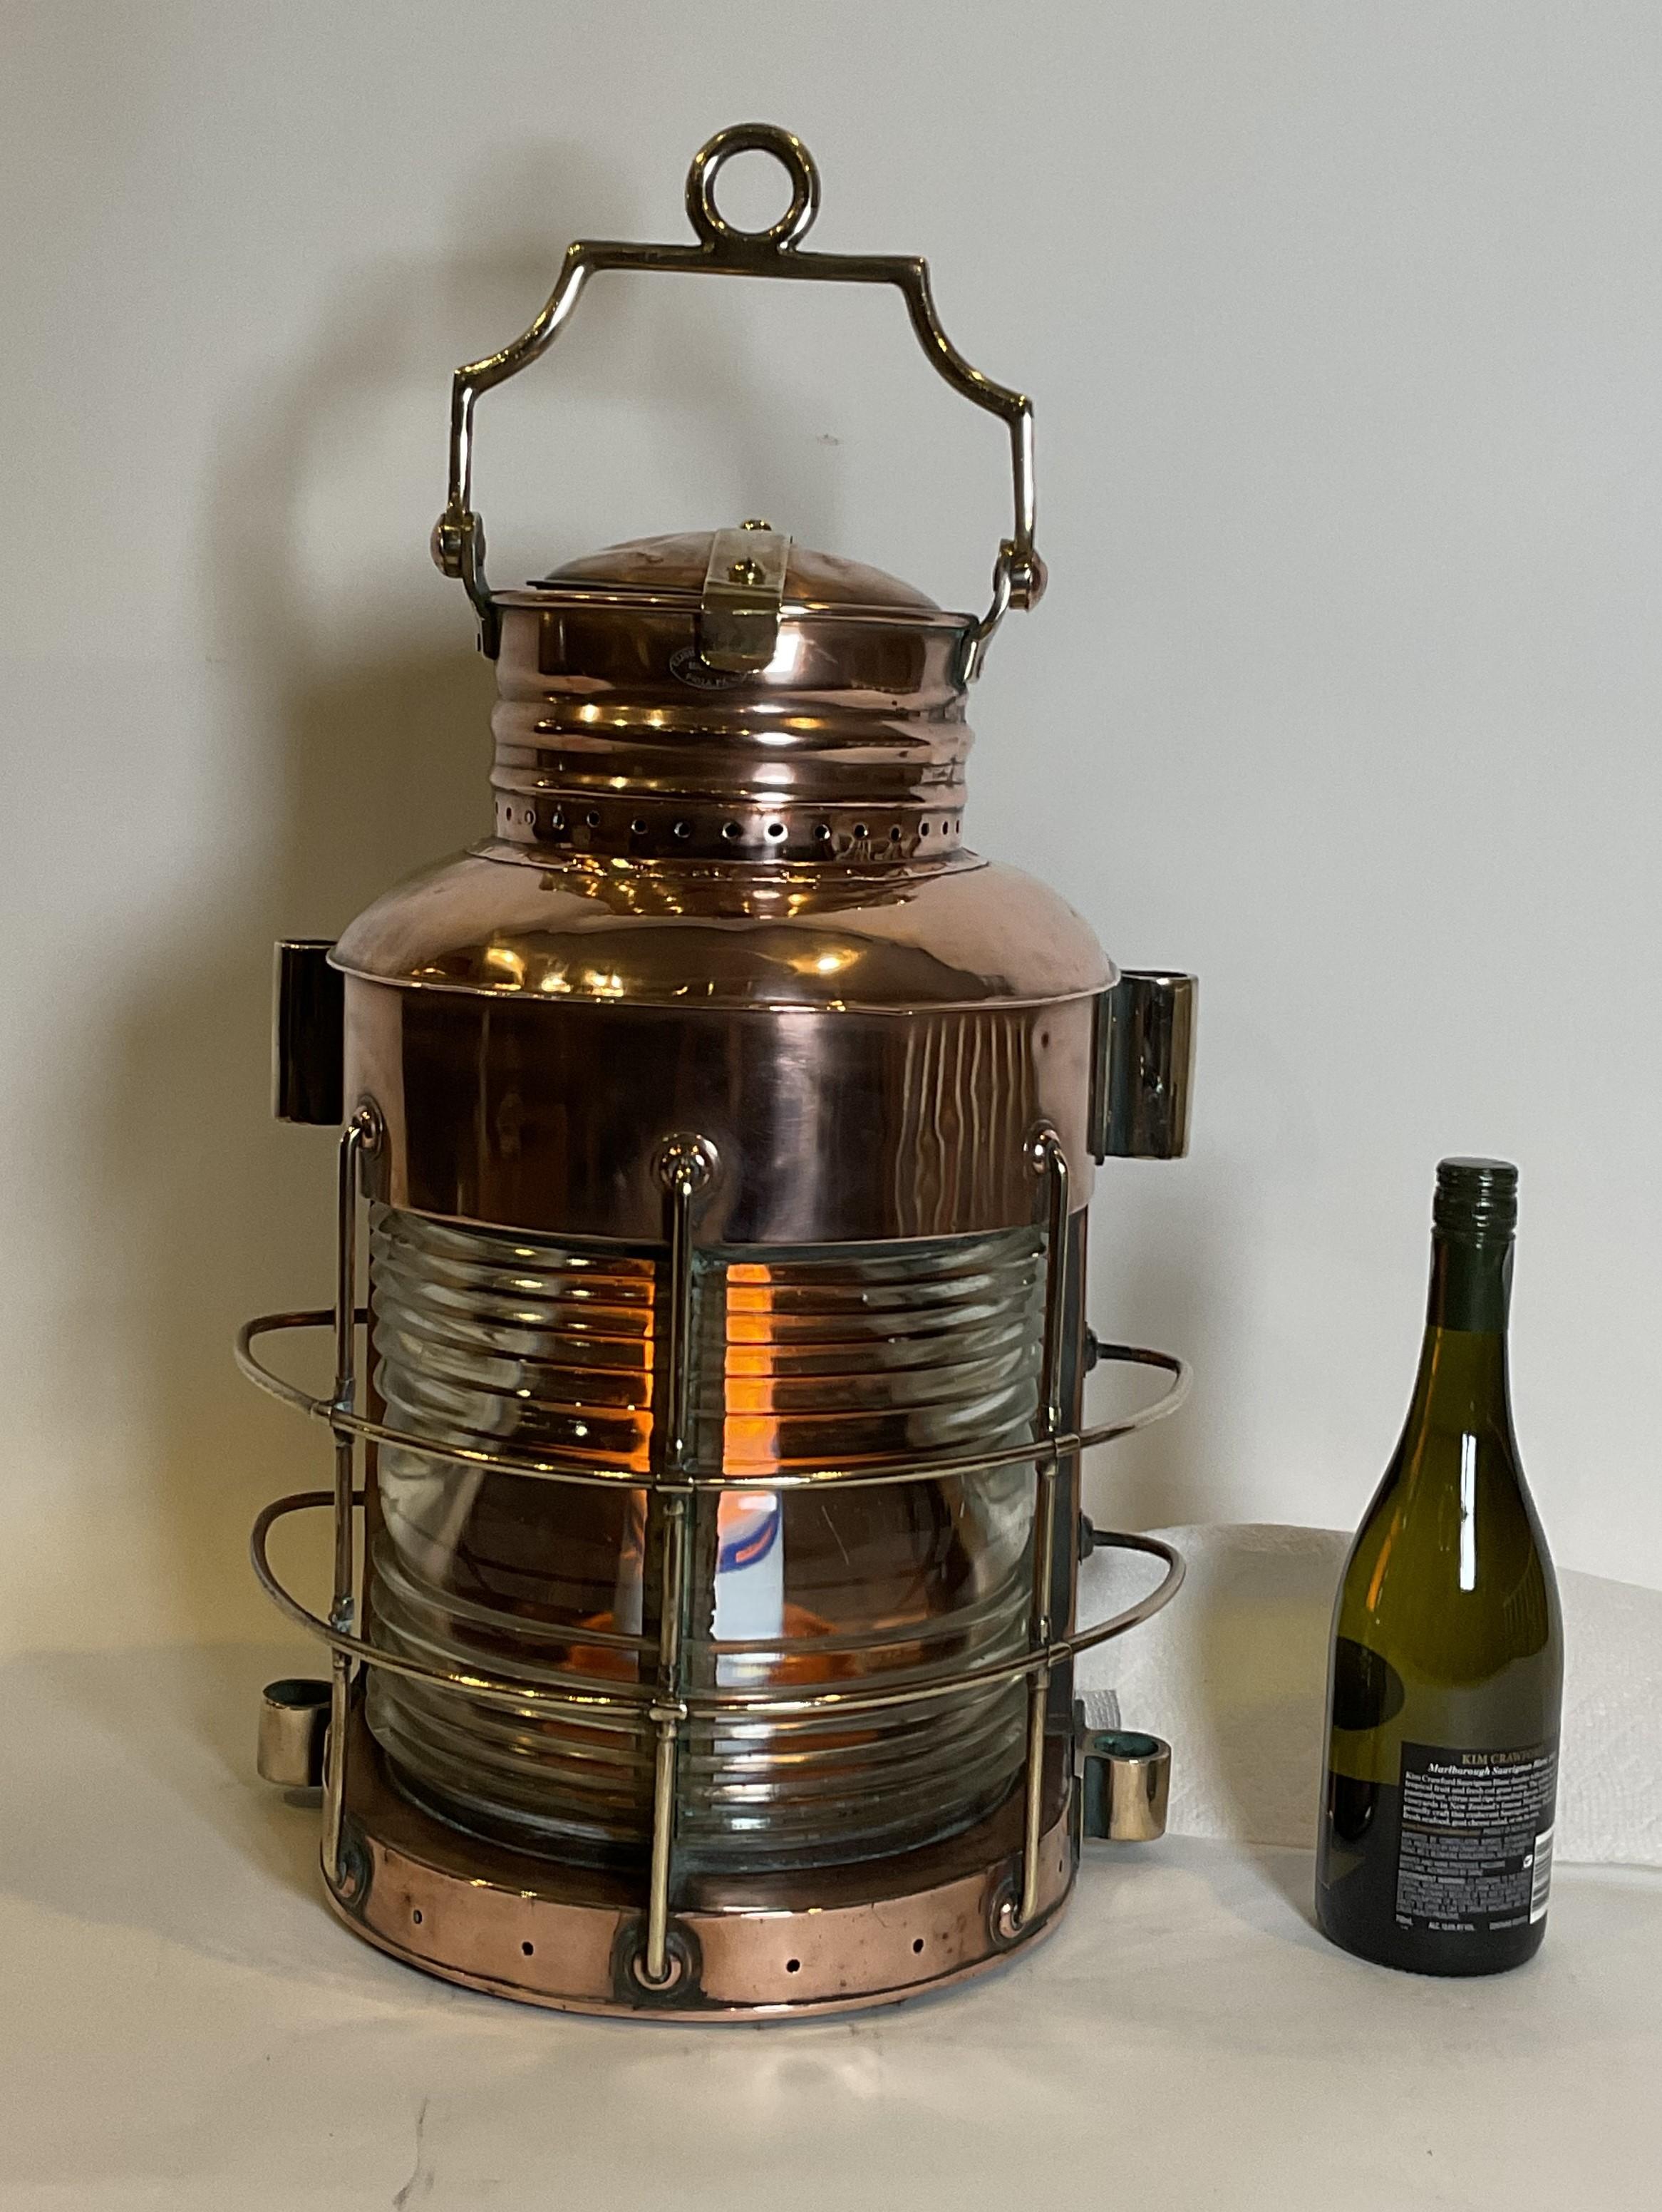 Massive polished copper ships masthead lantern. Fitted with fresnel glass lens. Large vented top, heavy brass carry handle, door to rear. Sturdy brass mounting rings. 

Weight: 25 lbs.
Overall Dimensions: 21